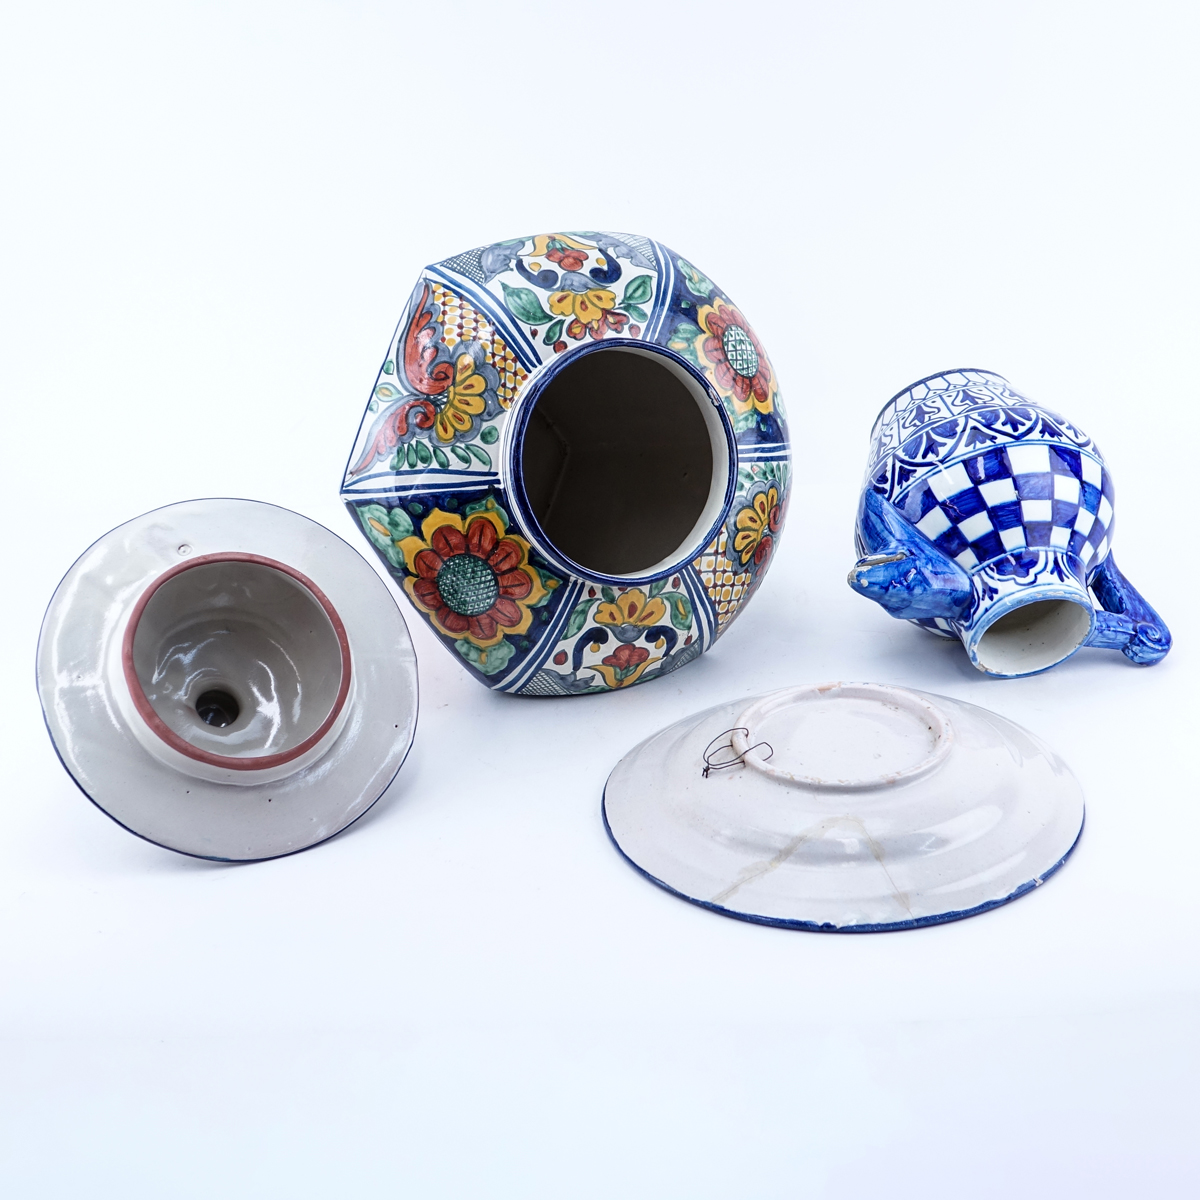 Grouping of Three (3): Large Mexican Faience Pottery Covered Jar, Faience Pottery Cabinet Plate, and Faience Pottery Pitcher. Covered jar is signed others are unsigned.